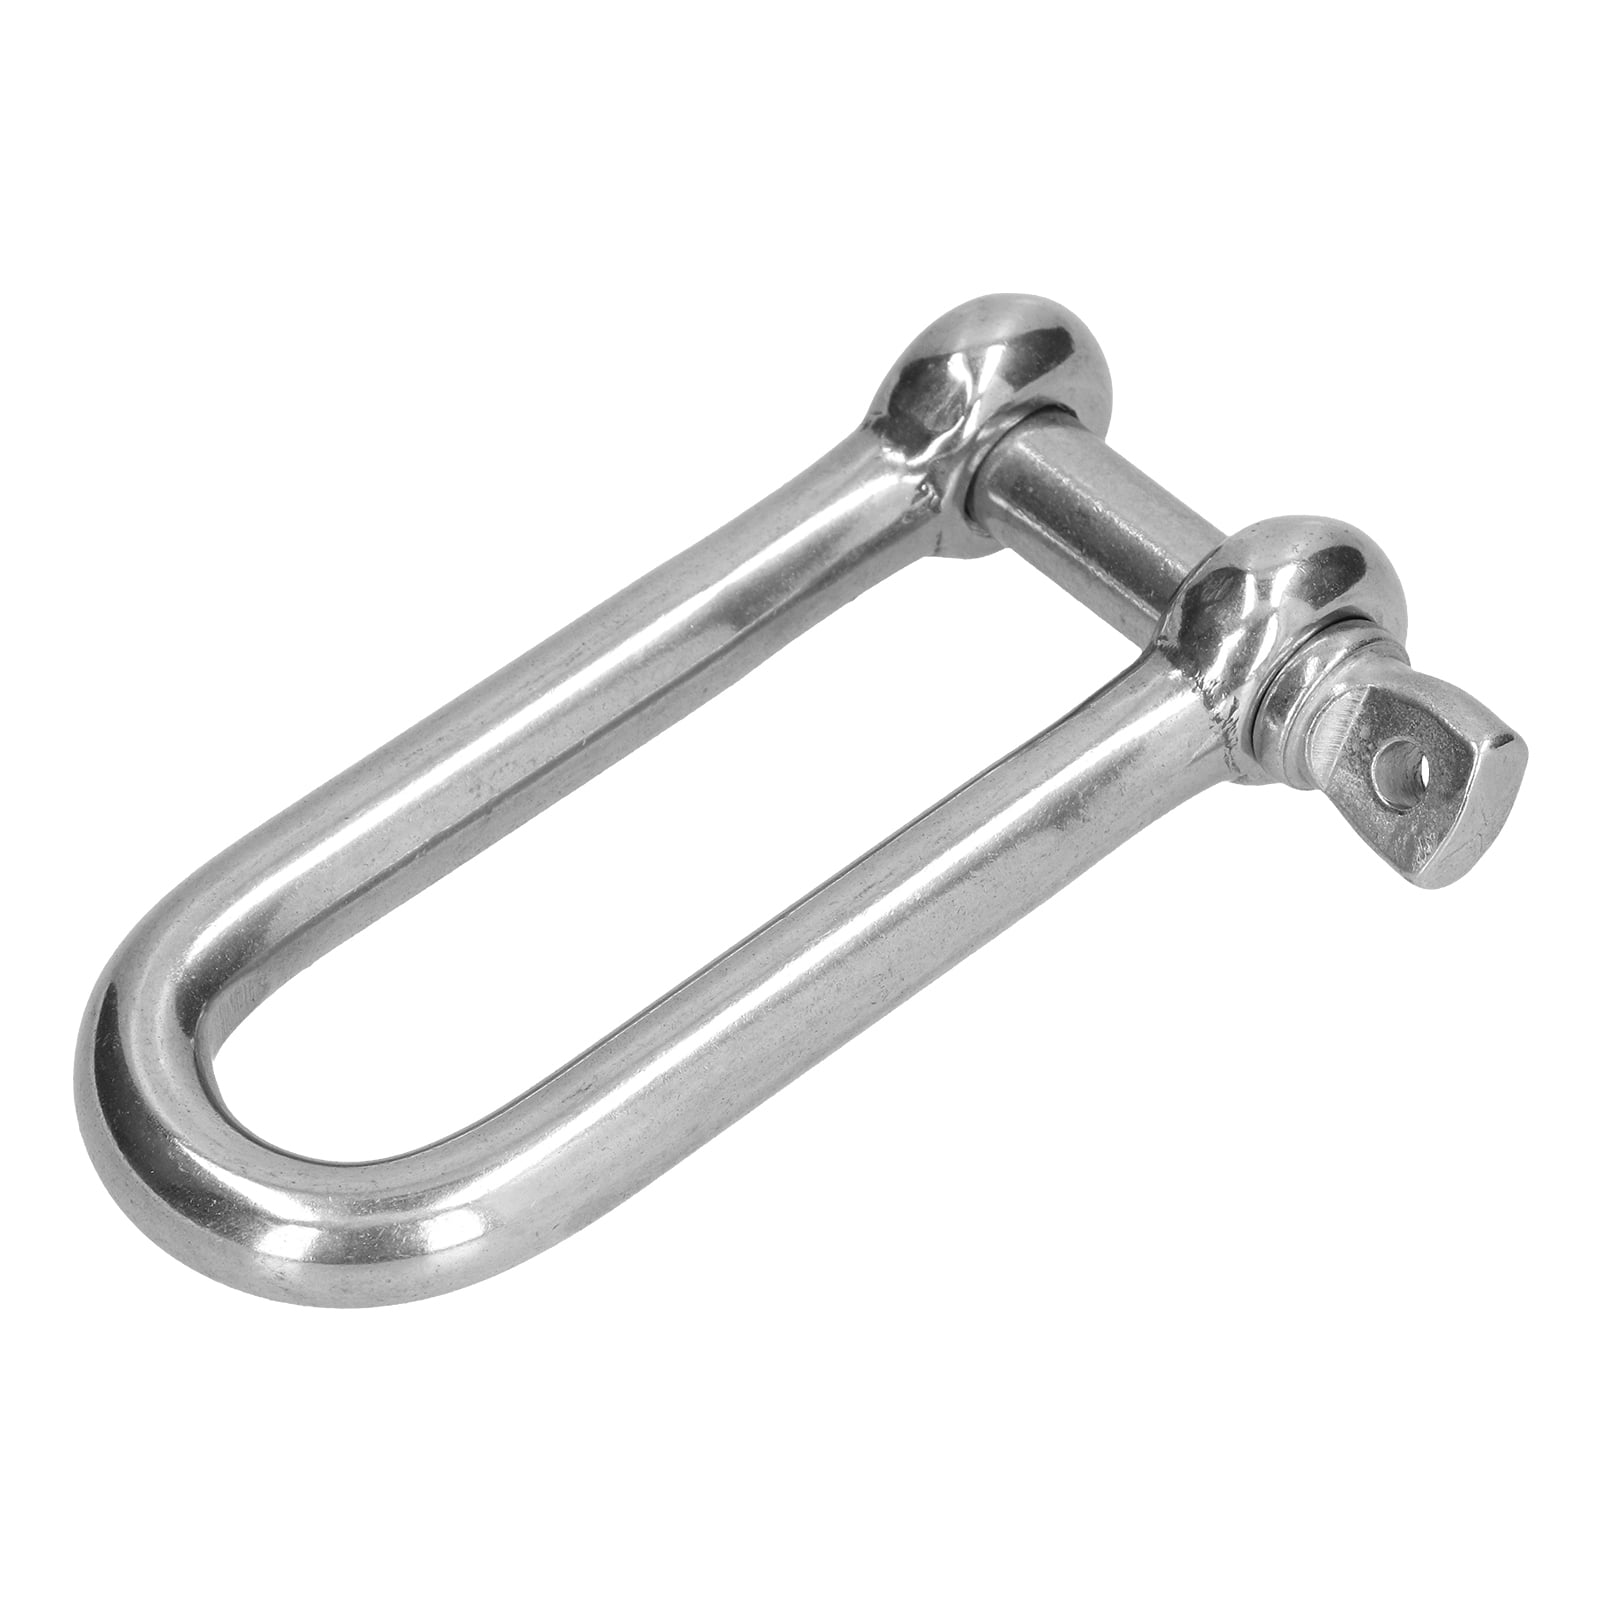 5mm 3/16" Marine Bow Shackle Clevis DRing 316 Stainless Steel Sailboat Rigging 